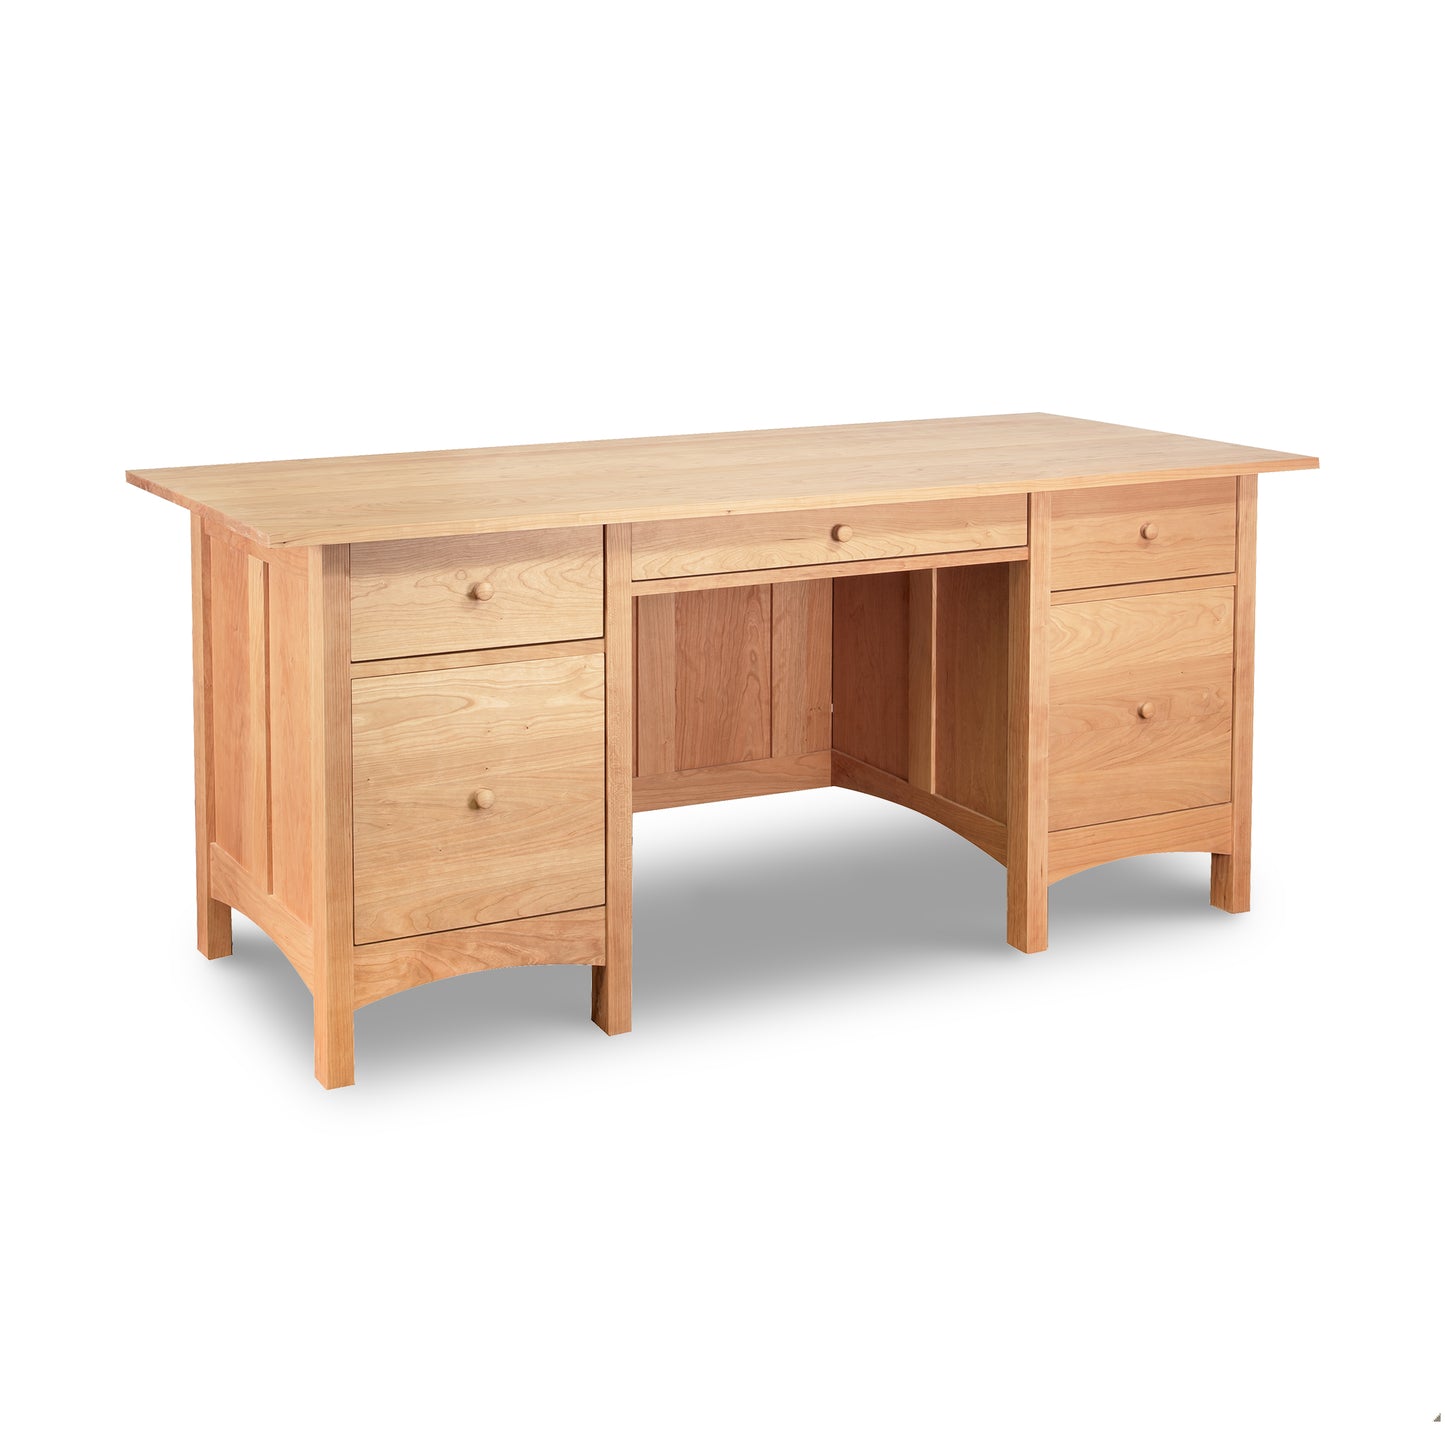 Burlington Shaker Executive Desk by Vermont Furniture Designs, with three drawers on one side and a cabinet on the other, isolated on a white background.